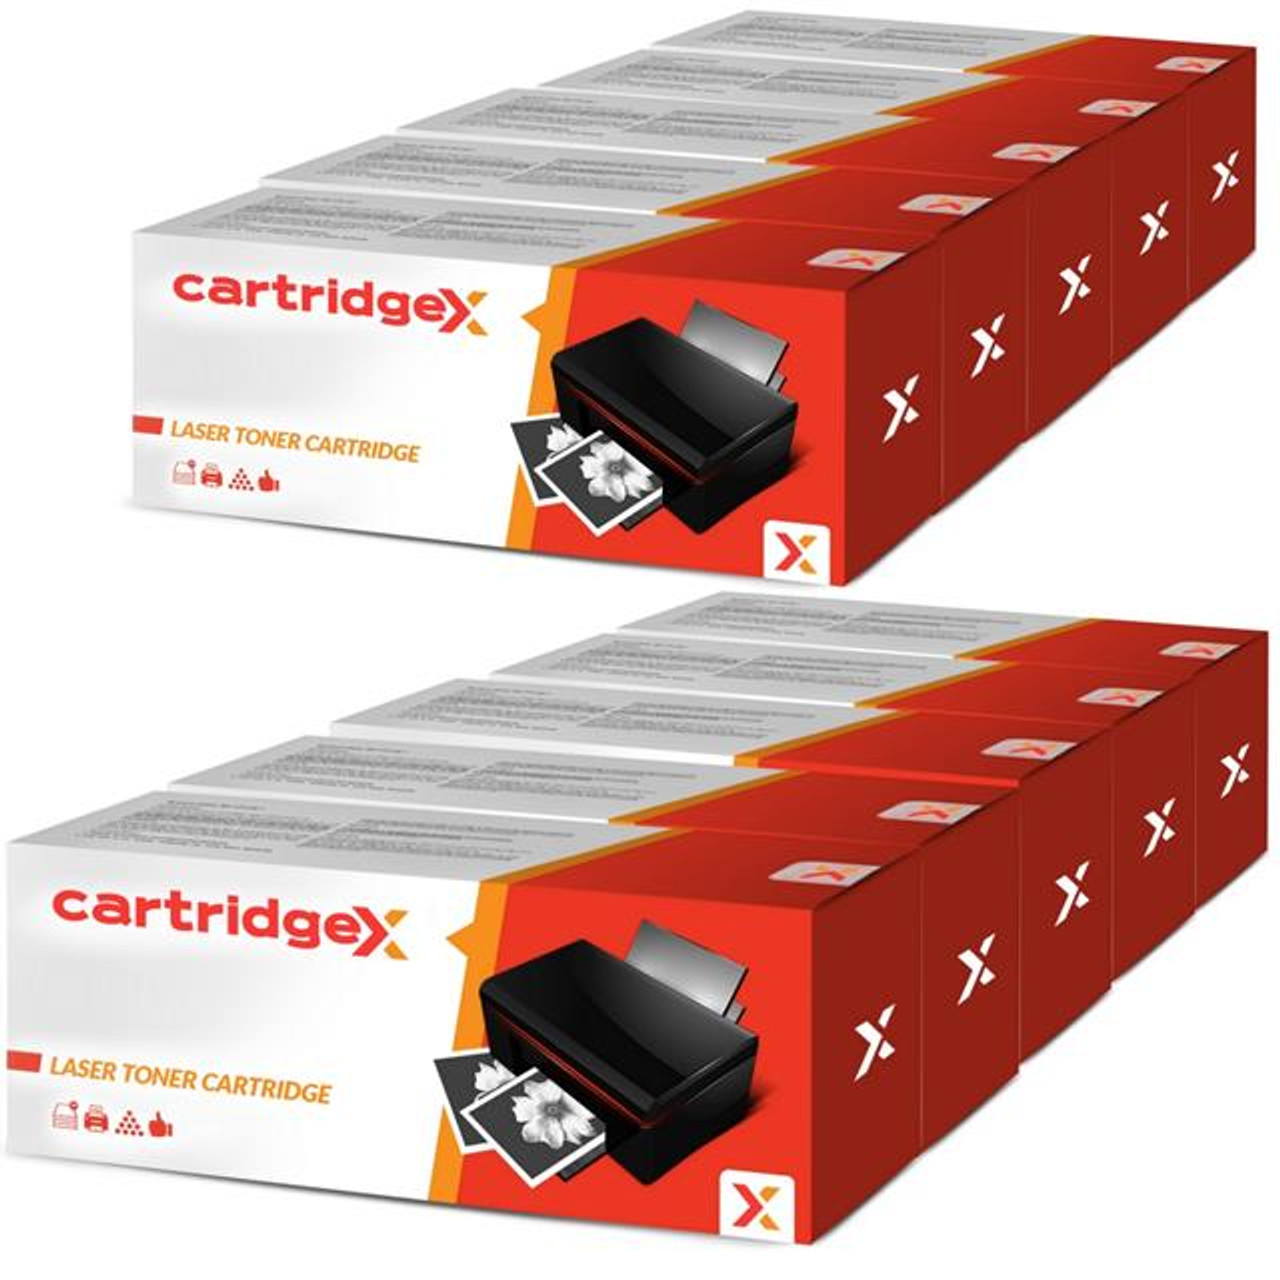 Compatible 10 X High Yield Toner Cartridge For Lexmark T654dn T654dtn T654n T650dn